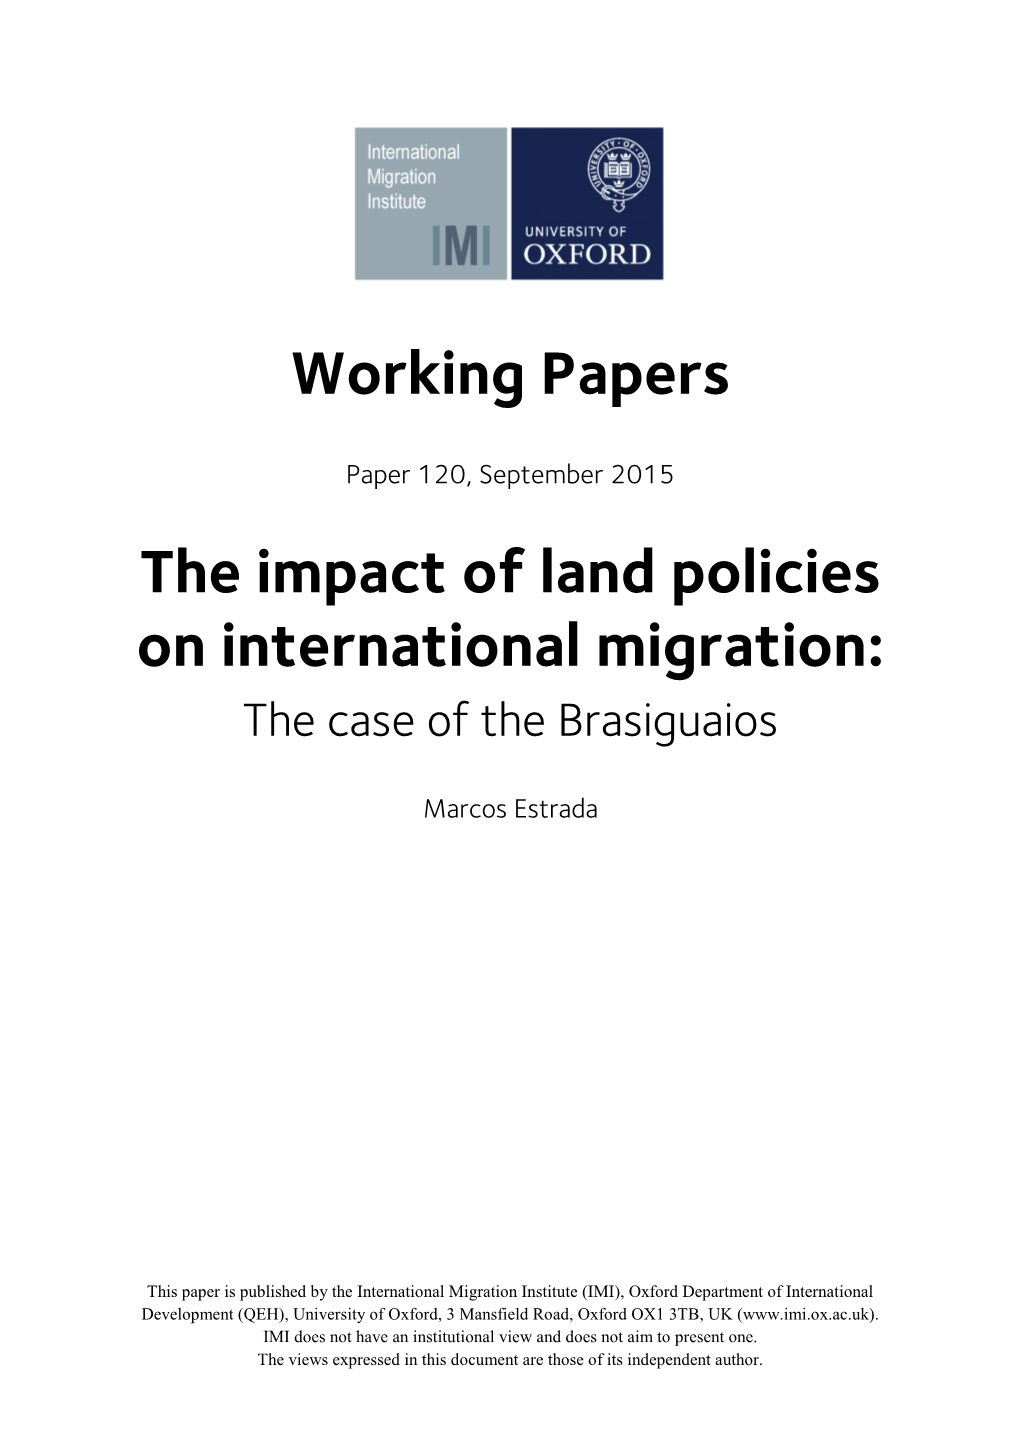 Working Papers the Impact of Land Policies on International Migration